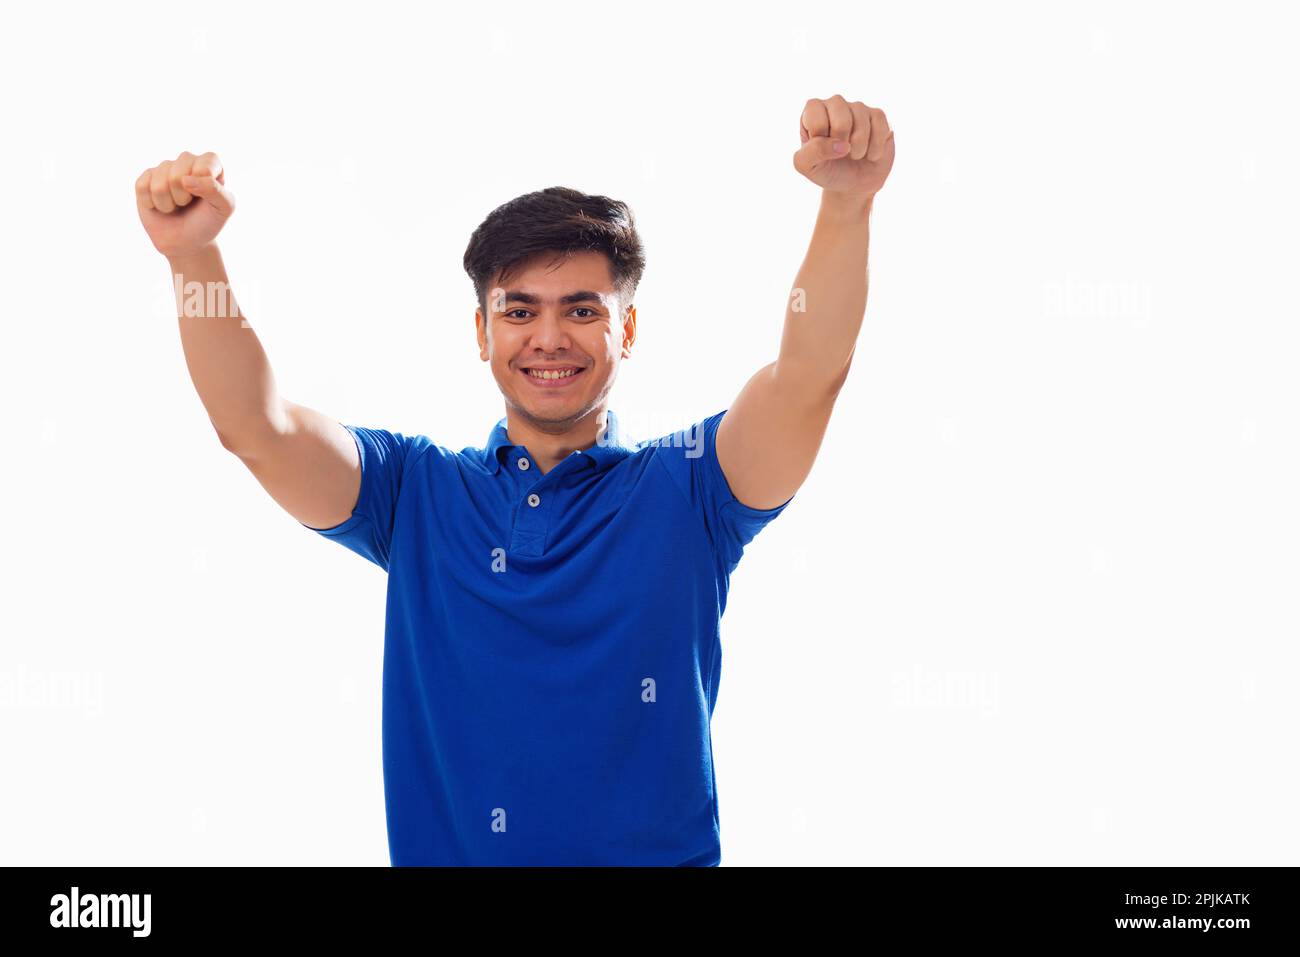 Portrait of young man cheering against white background Stock Photo